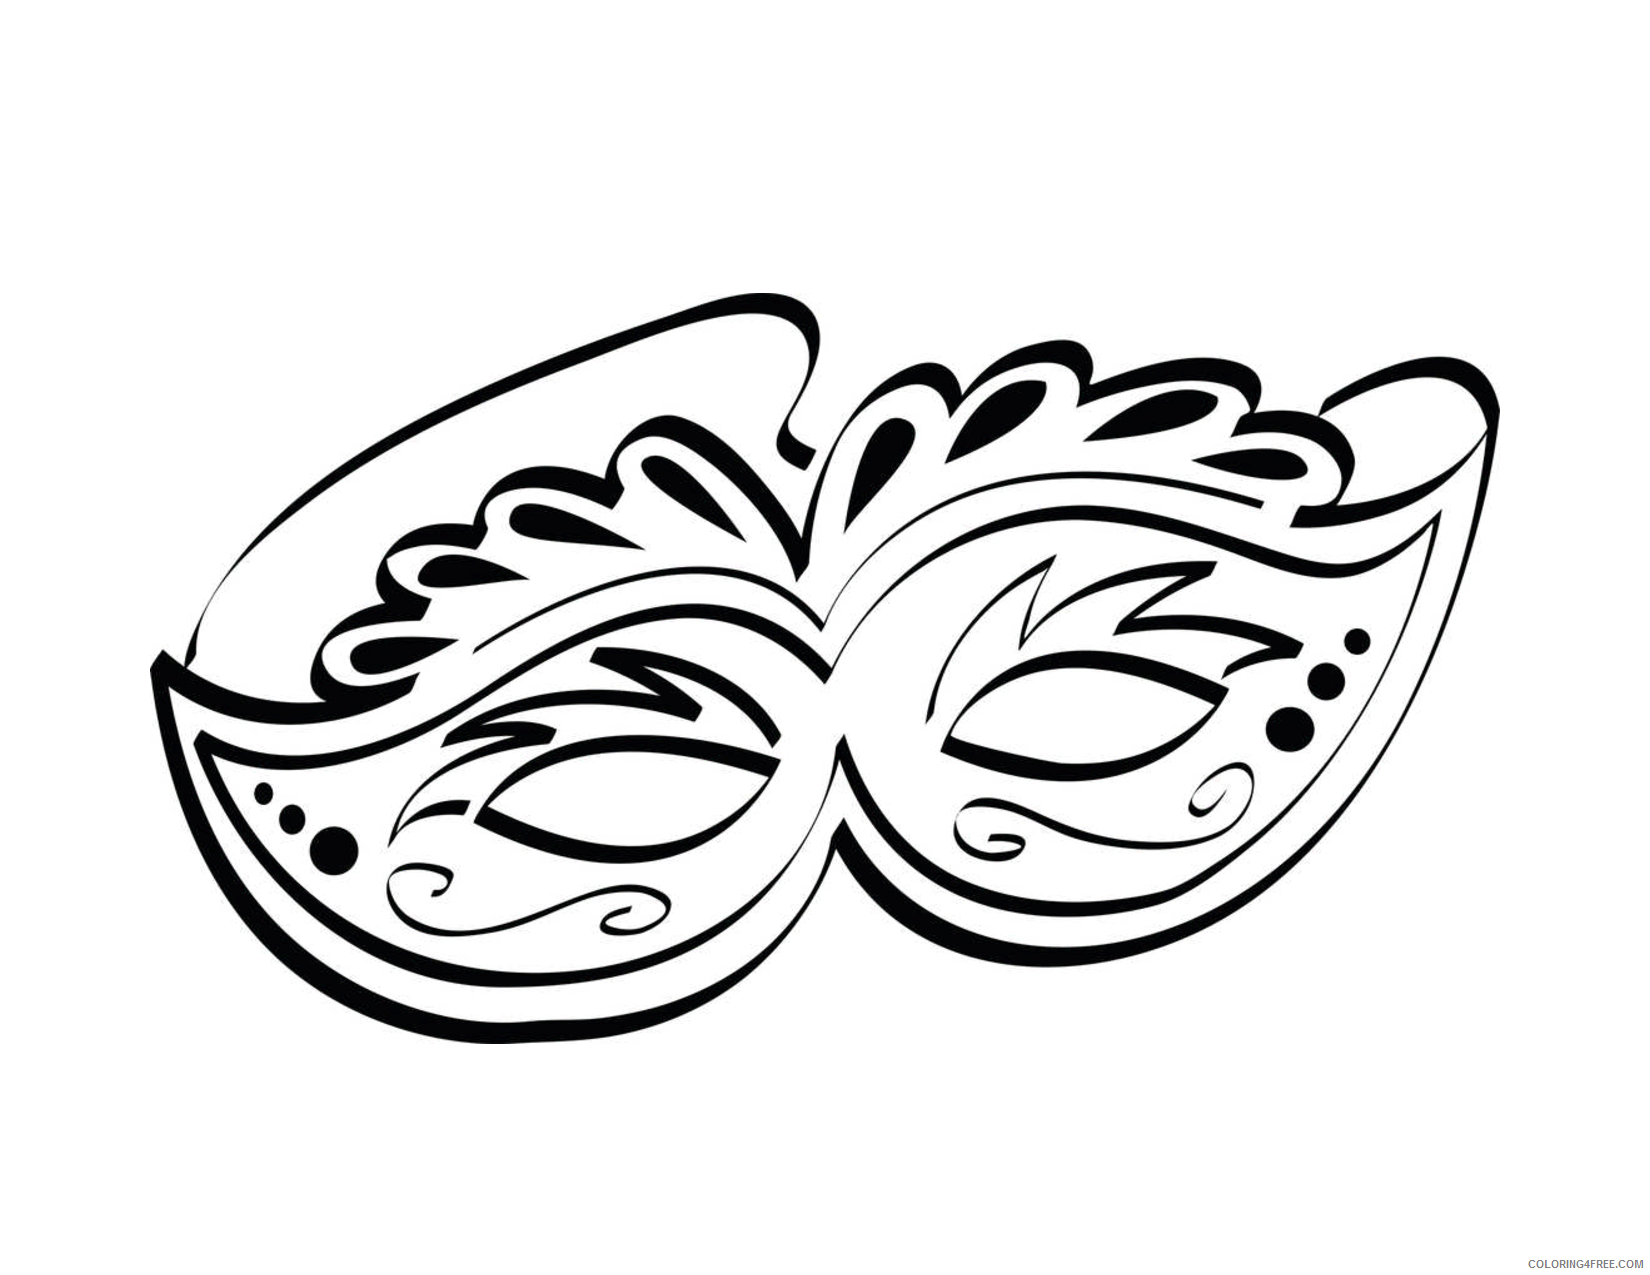 mardi gras mask coloring pages for kids Coloring4free